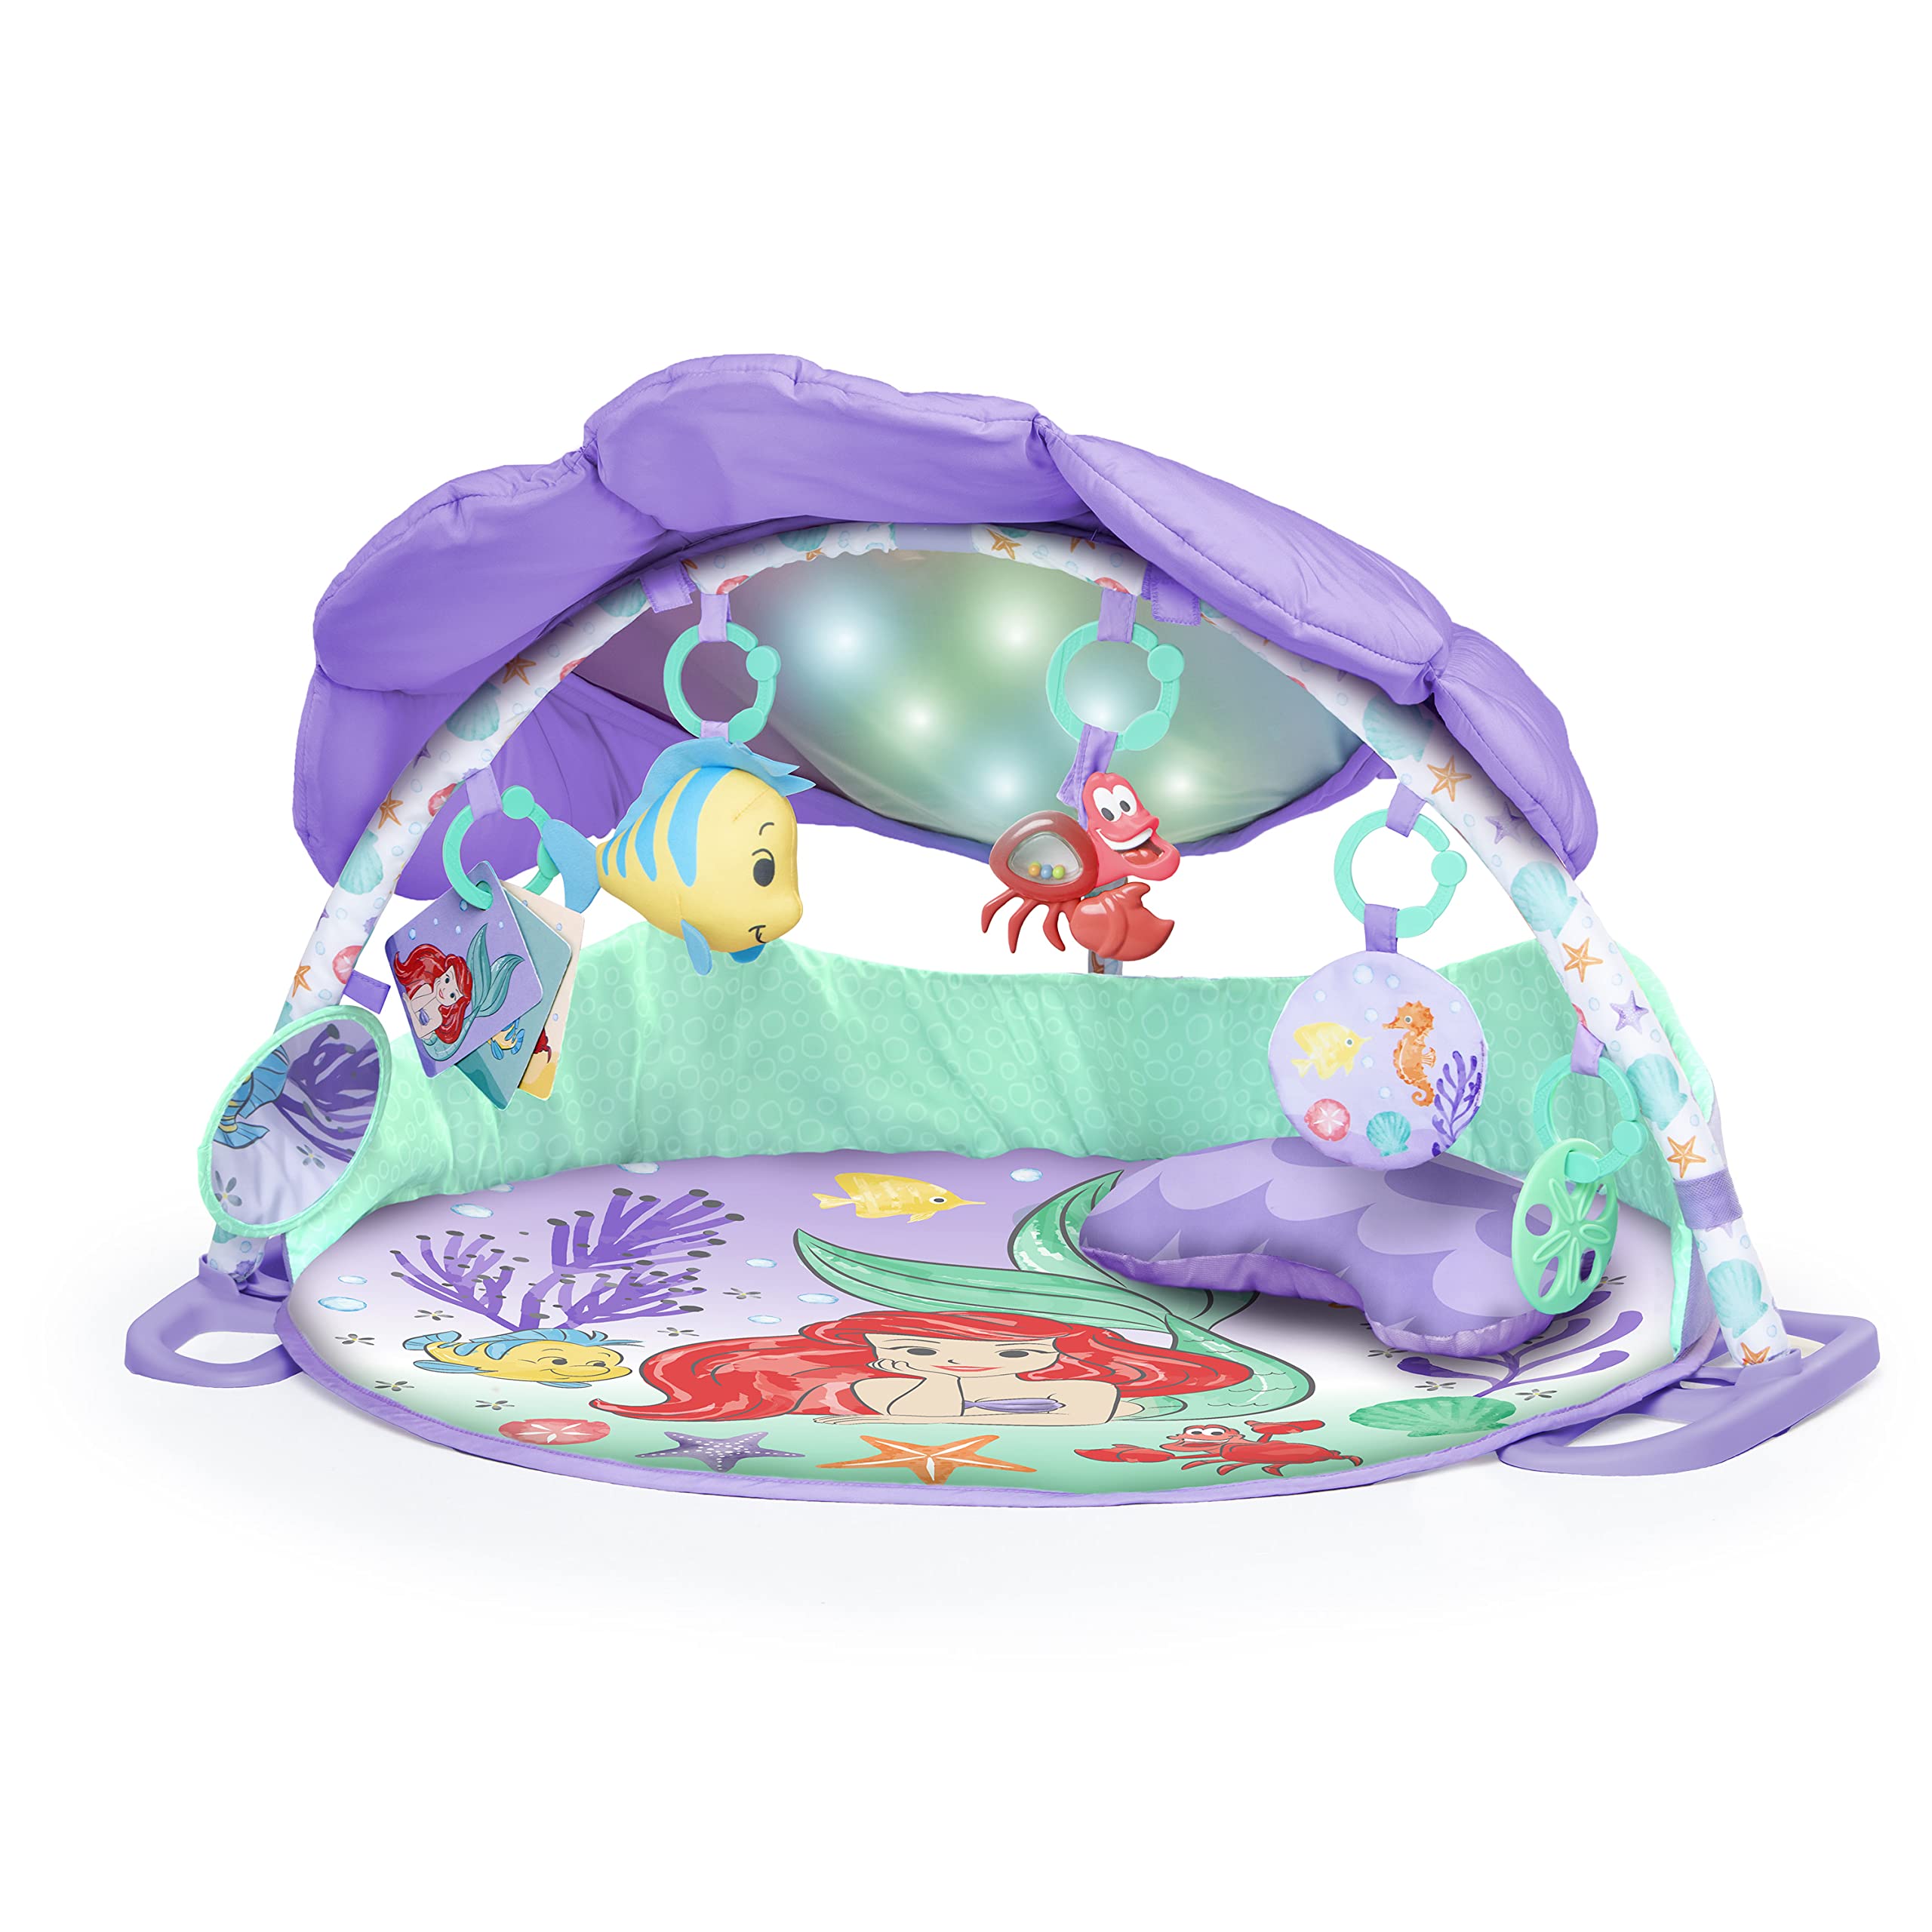 Bright Starts Disney Baby The Little Mermaid Twinkle Trove Light-Up Musical Baby Activity Gym with Tummy Time Pillow, Newborn+